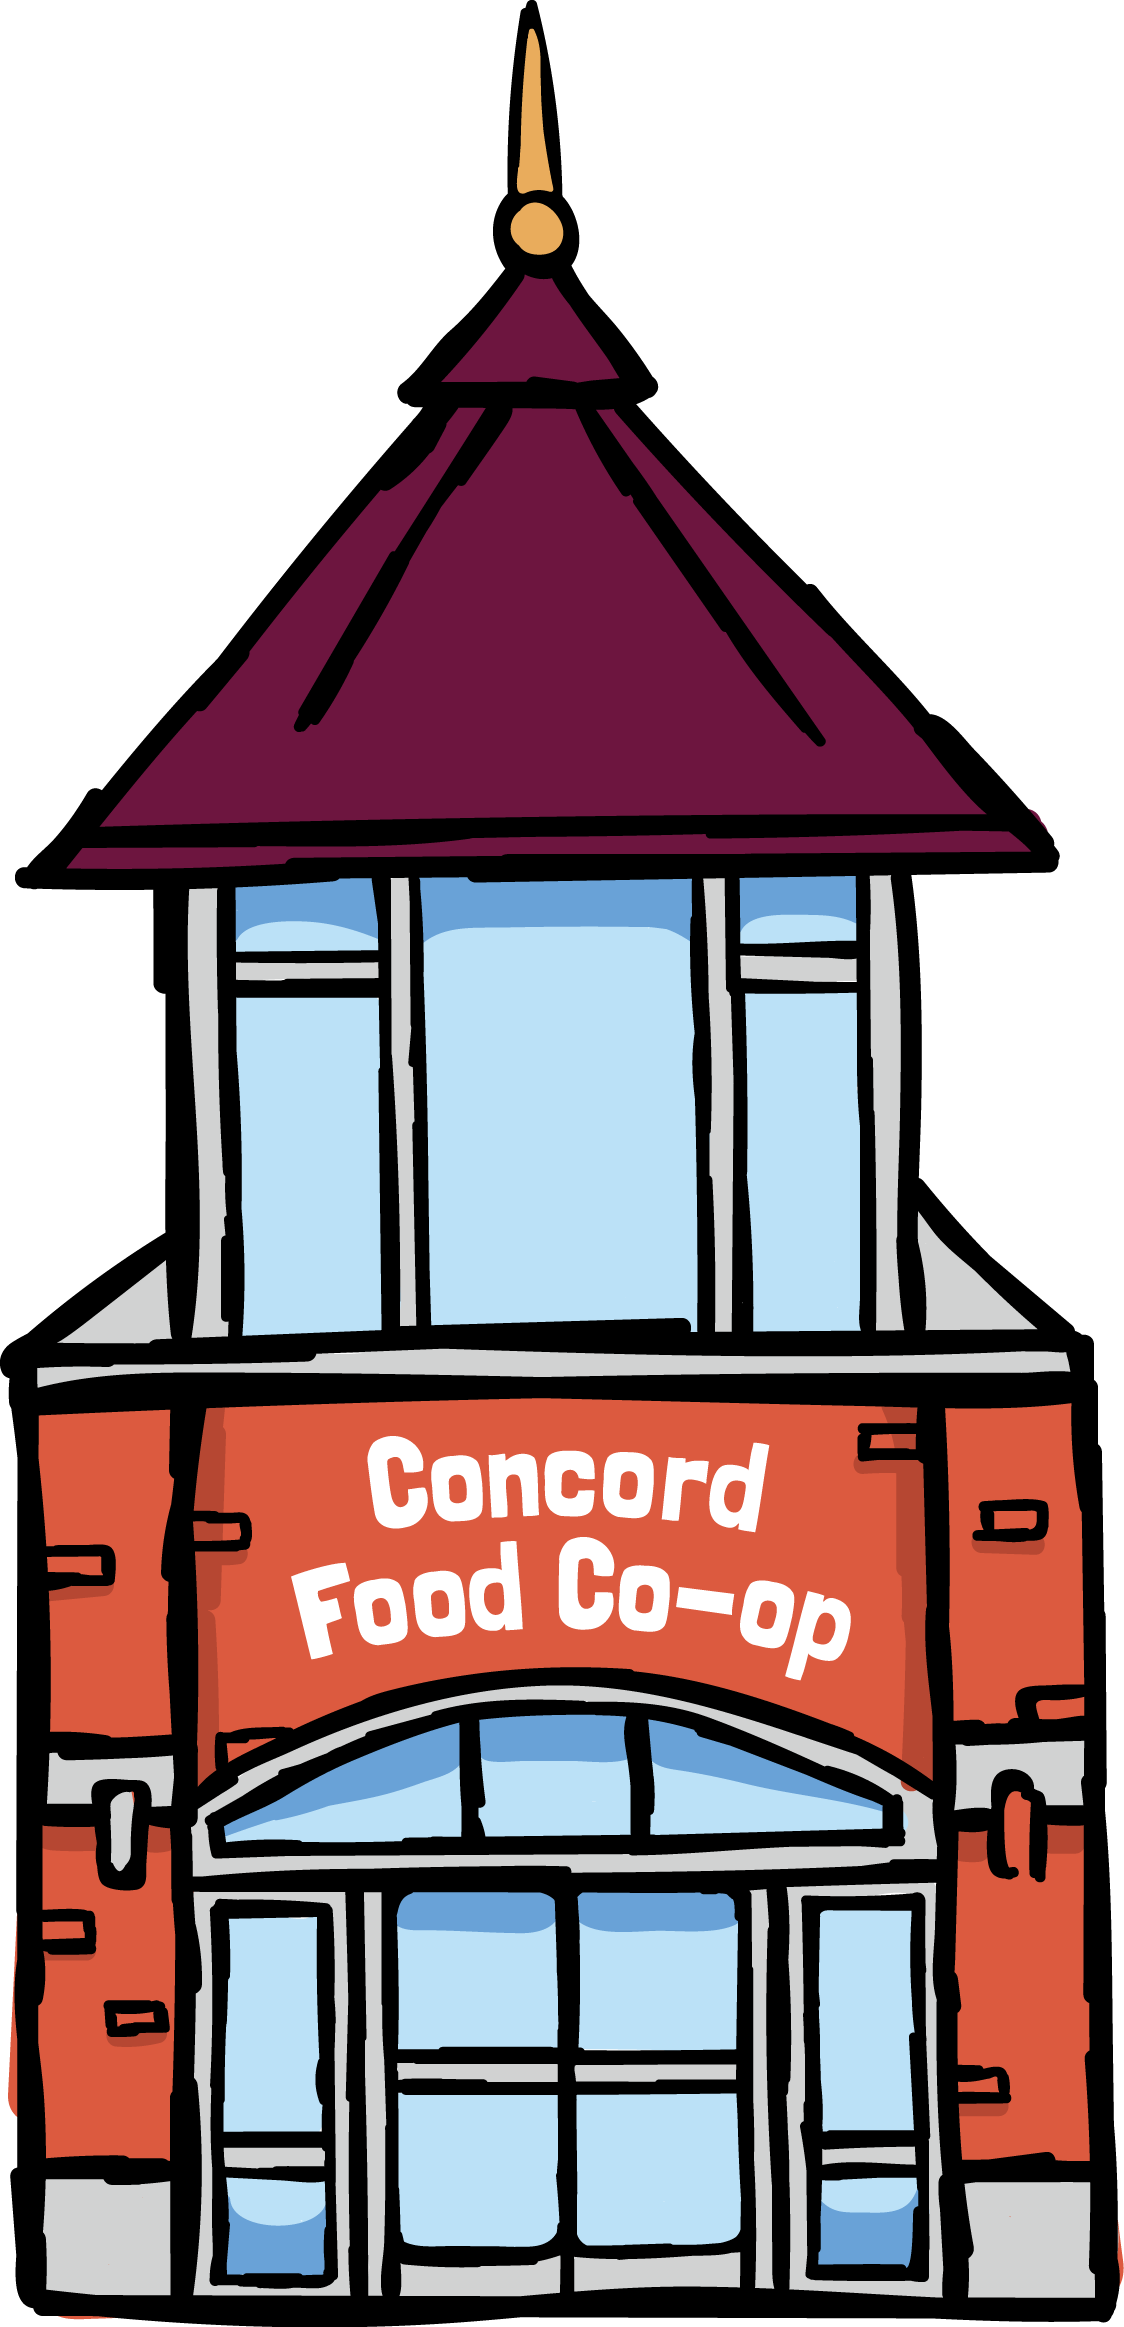 About - Concord Food Co-op (1124x2327)